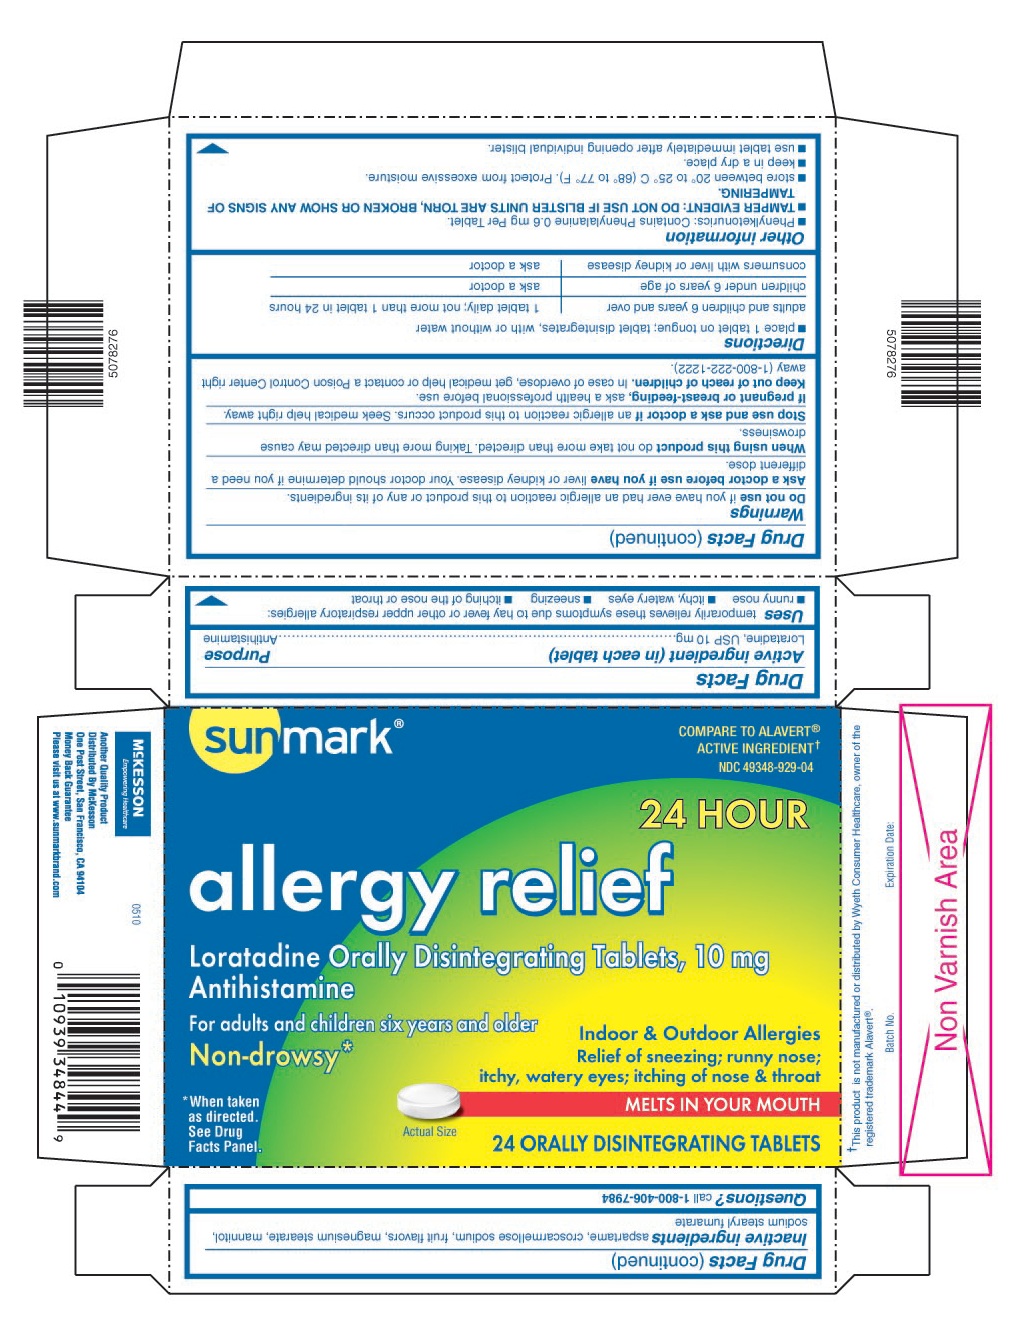 This is the 24 count blister carton label for Sunmark Loratadine ODT (Alavert).